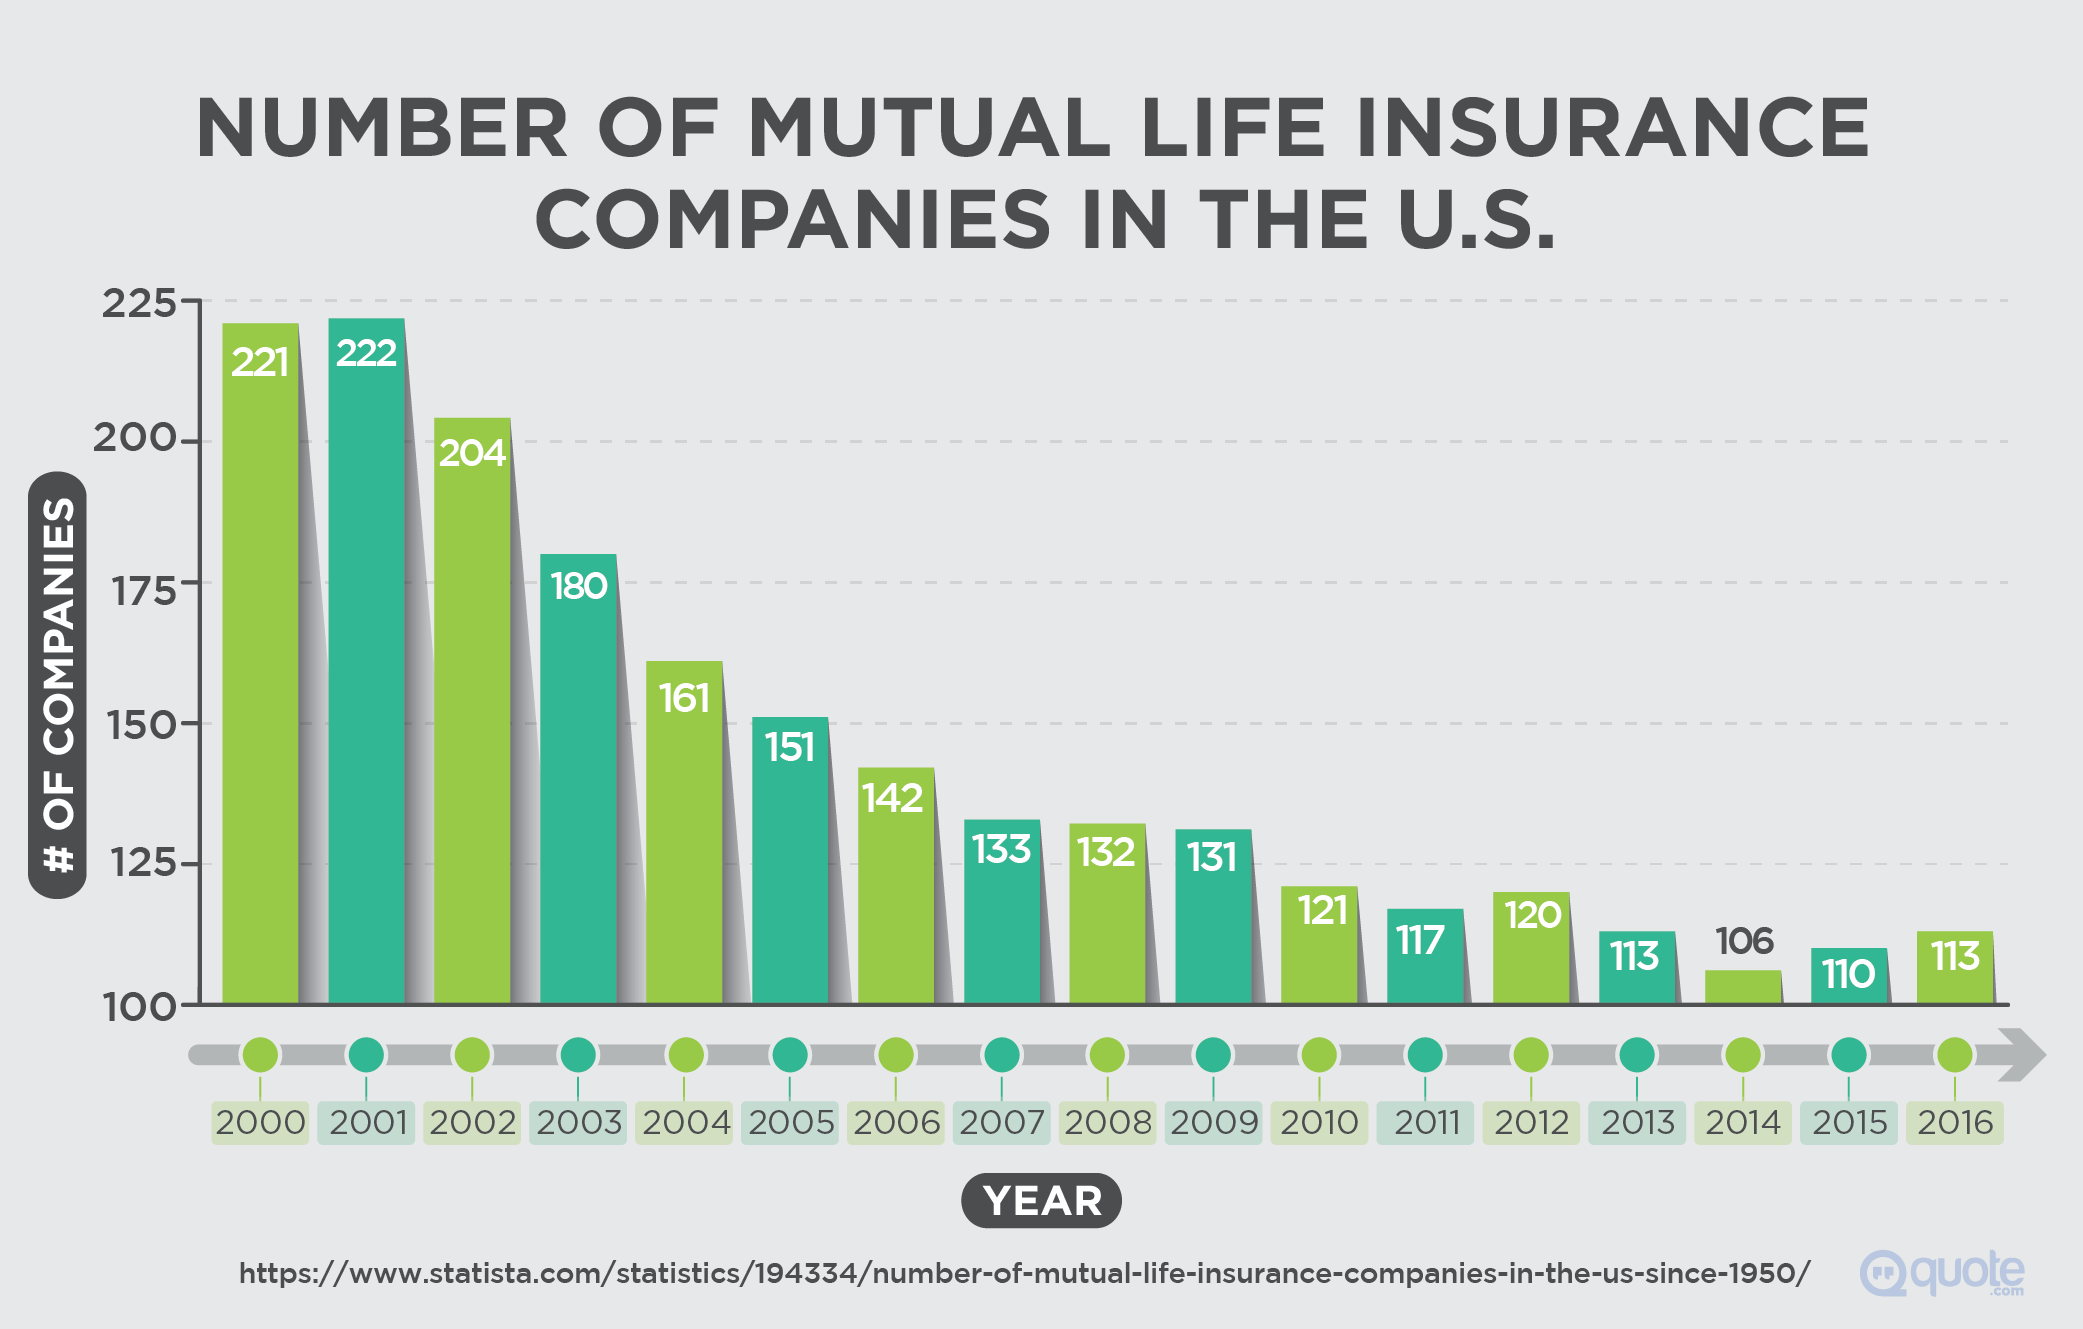 Mutual Life Insurance Companies in the U.S. from 2000-2016